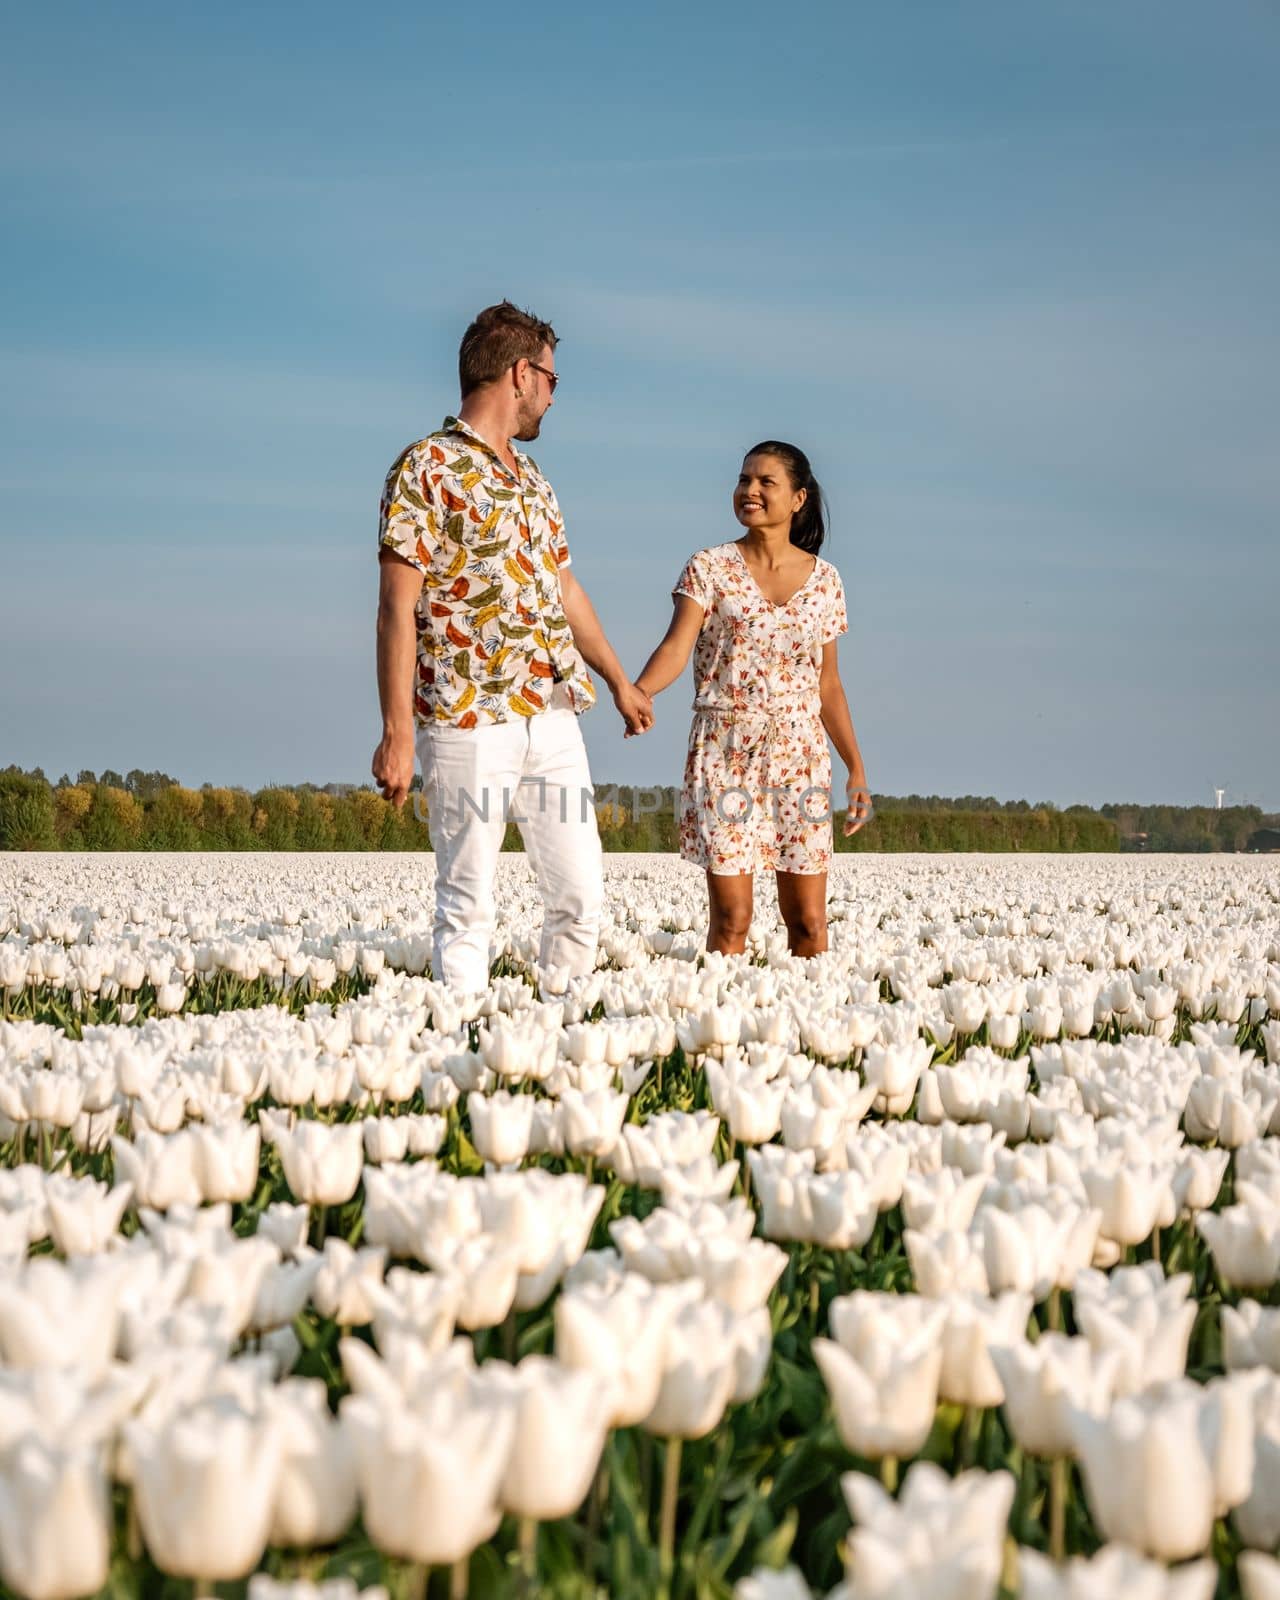 Couple of men and women in tulip field during Spring in the Netherlands by fokkebok